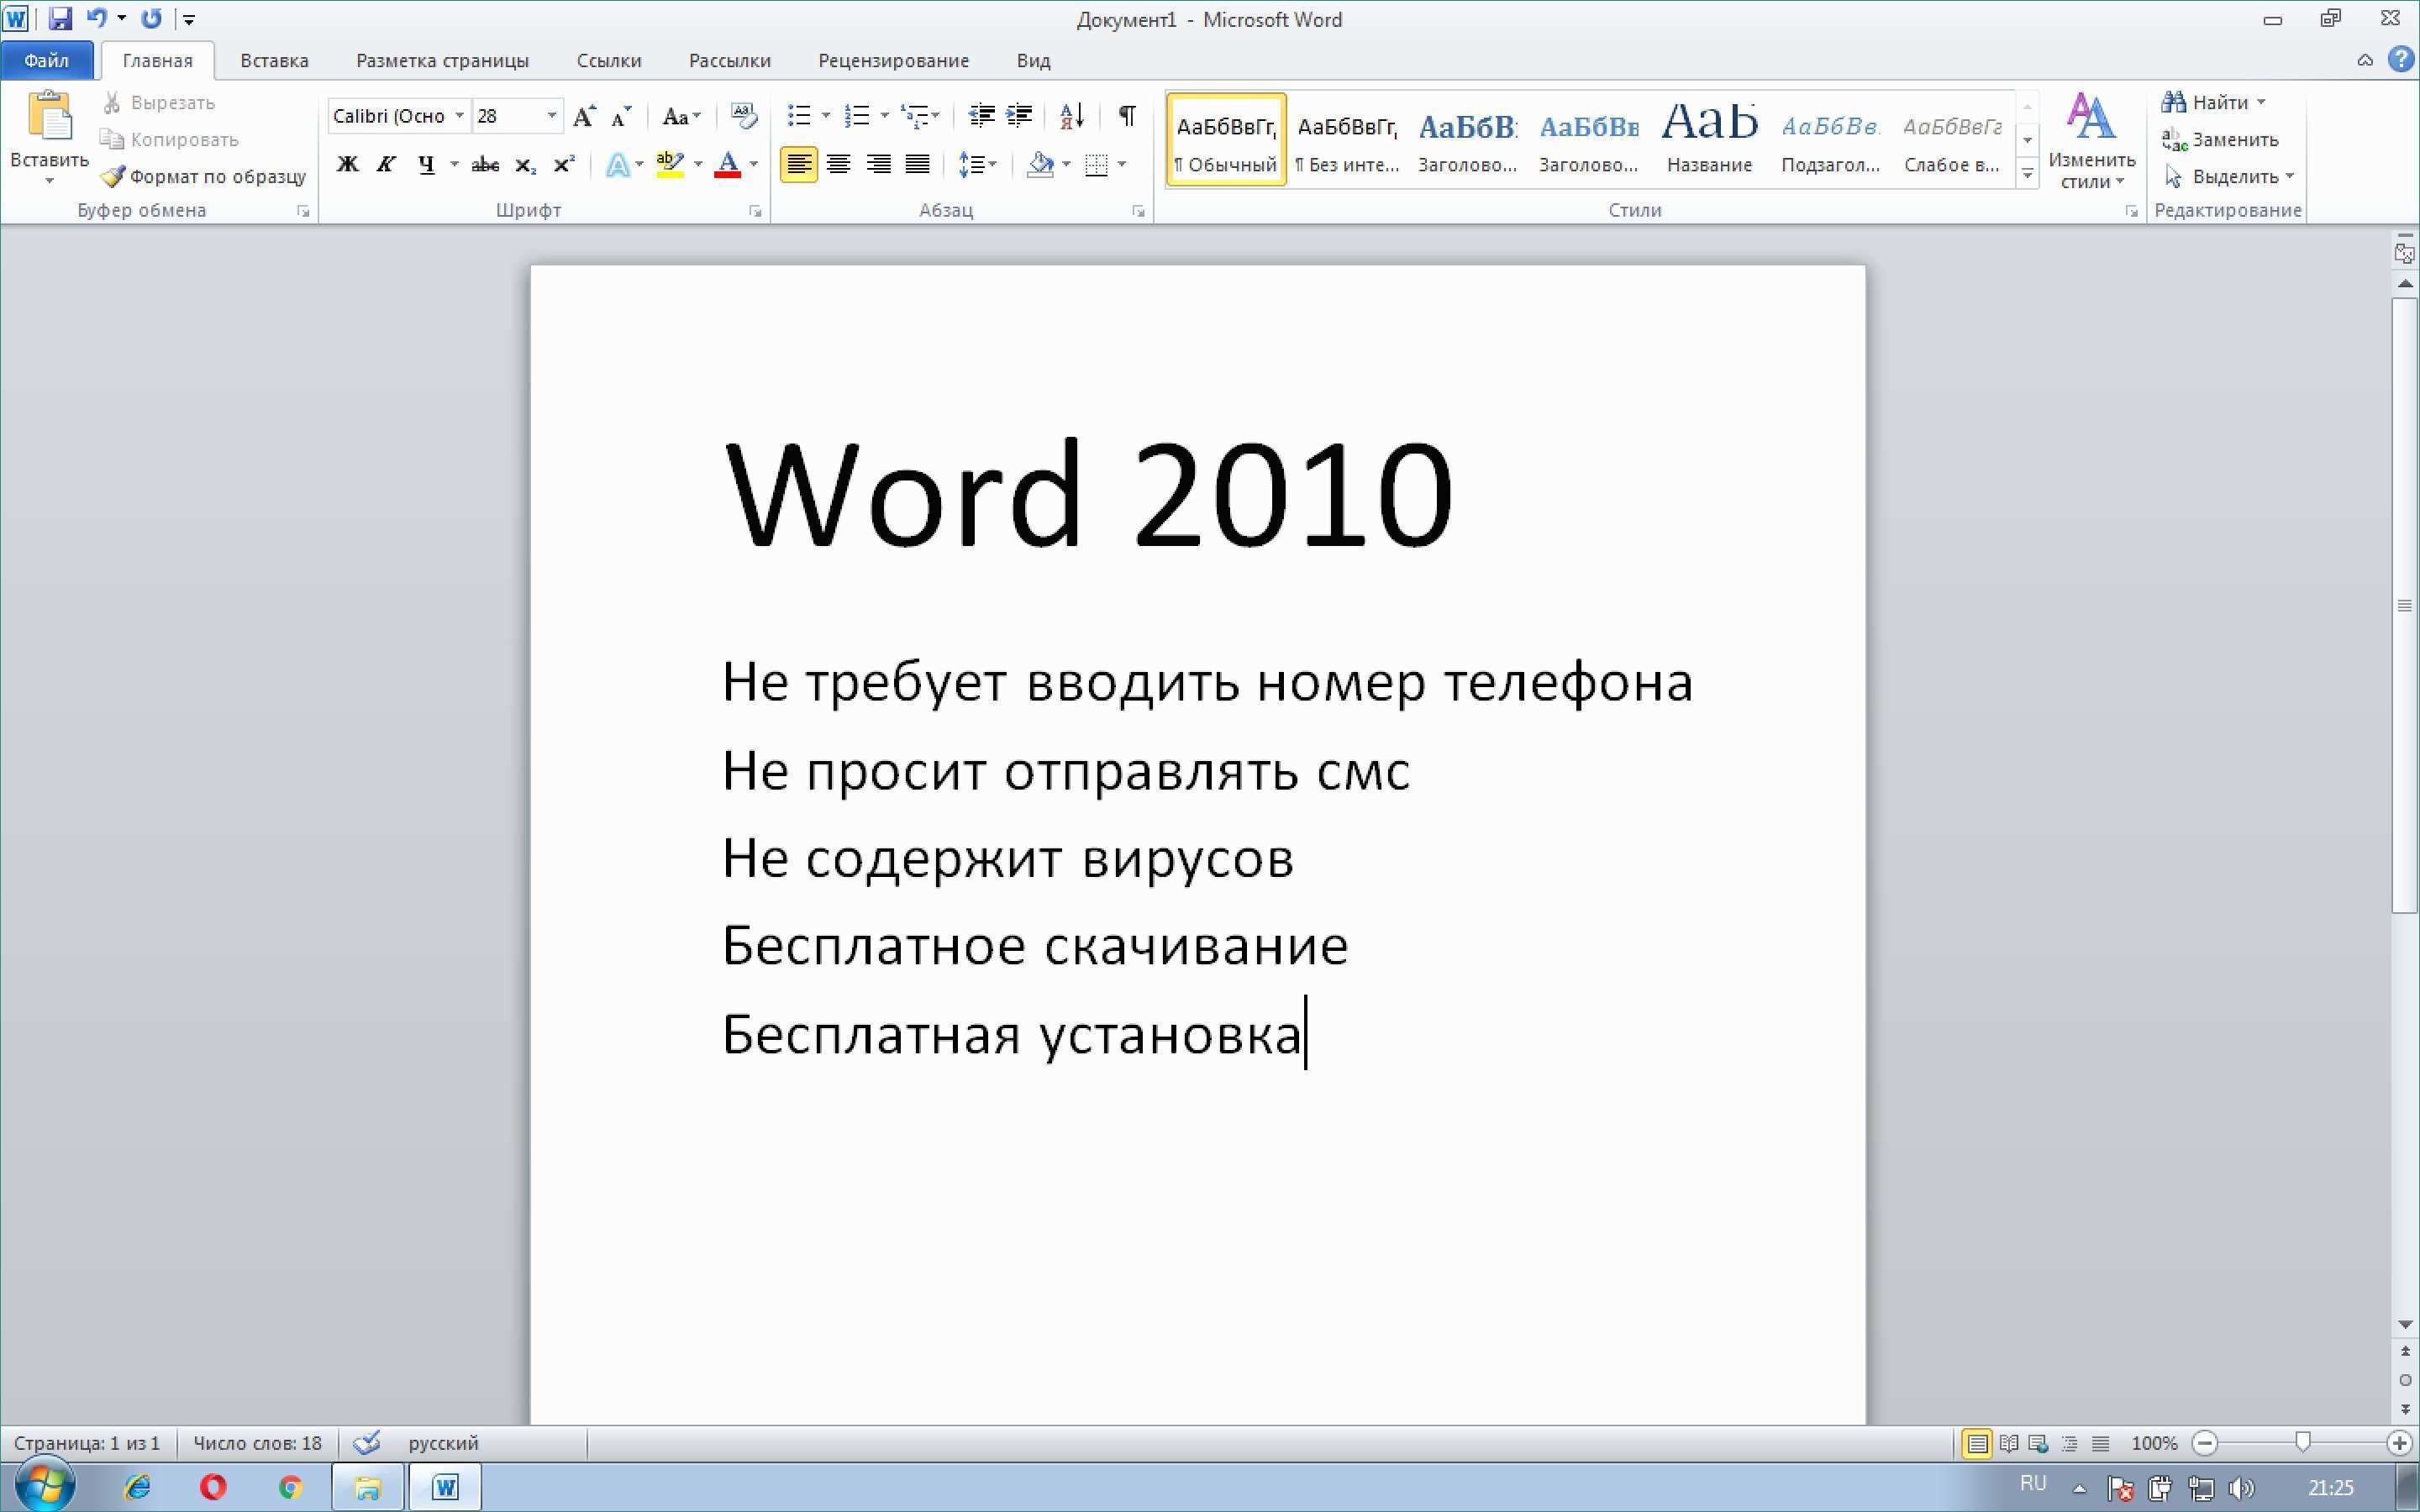 35 Blank Card Template For Word 2007 in Photoshop by Card Template For Word 2007